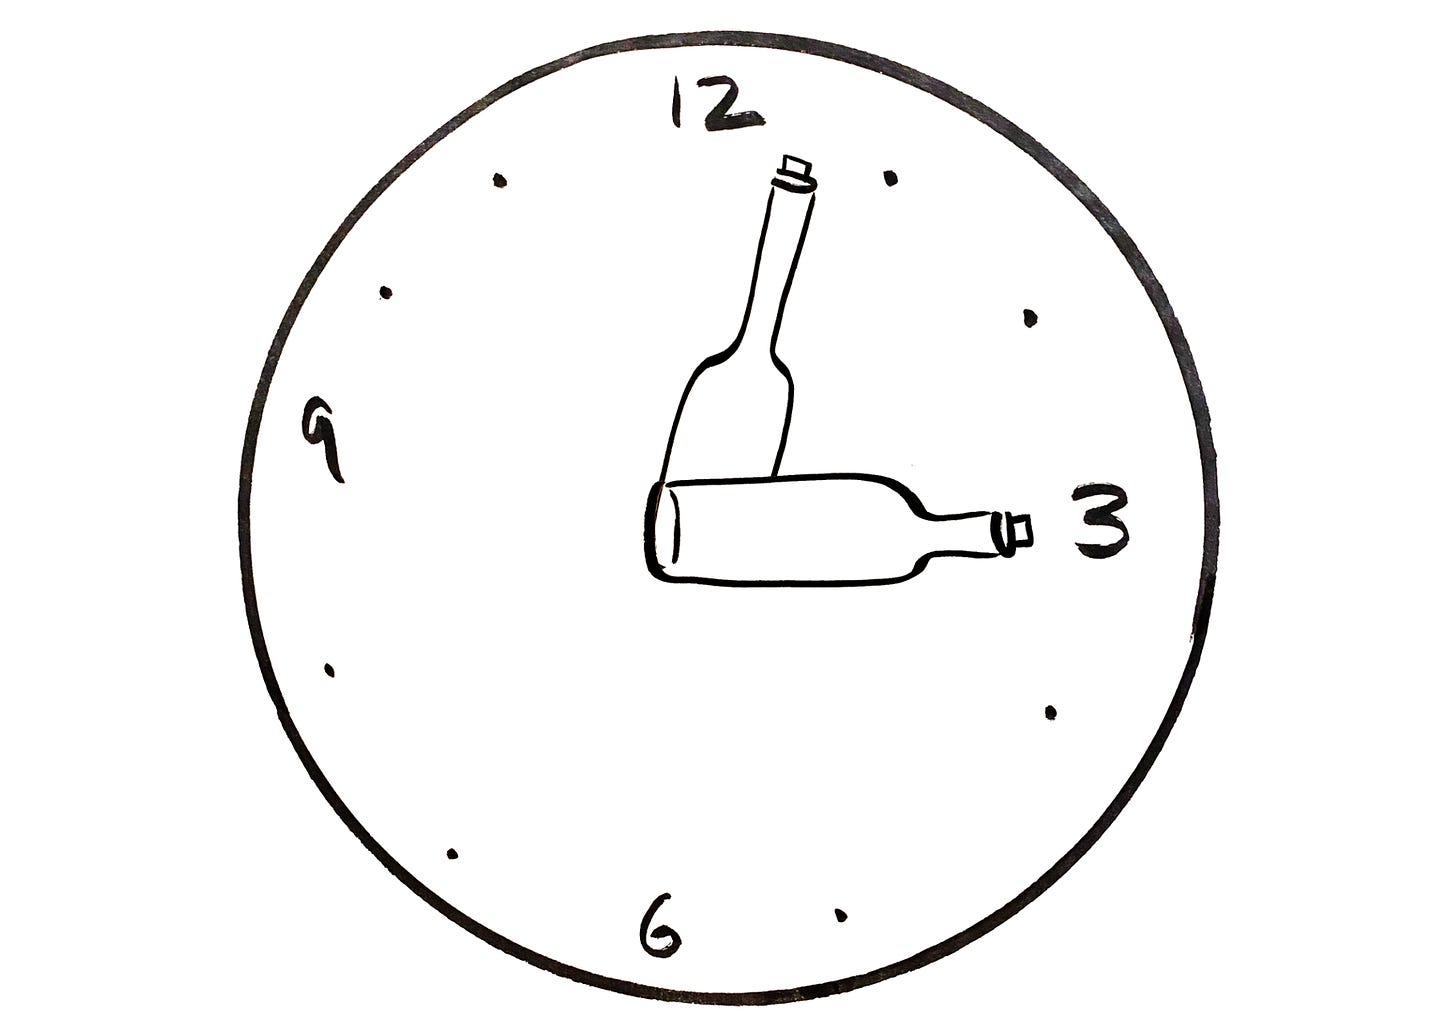 A clock where the hour and minute hands are wine bottles